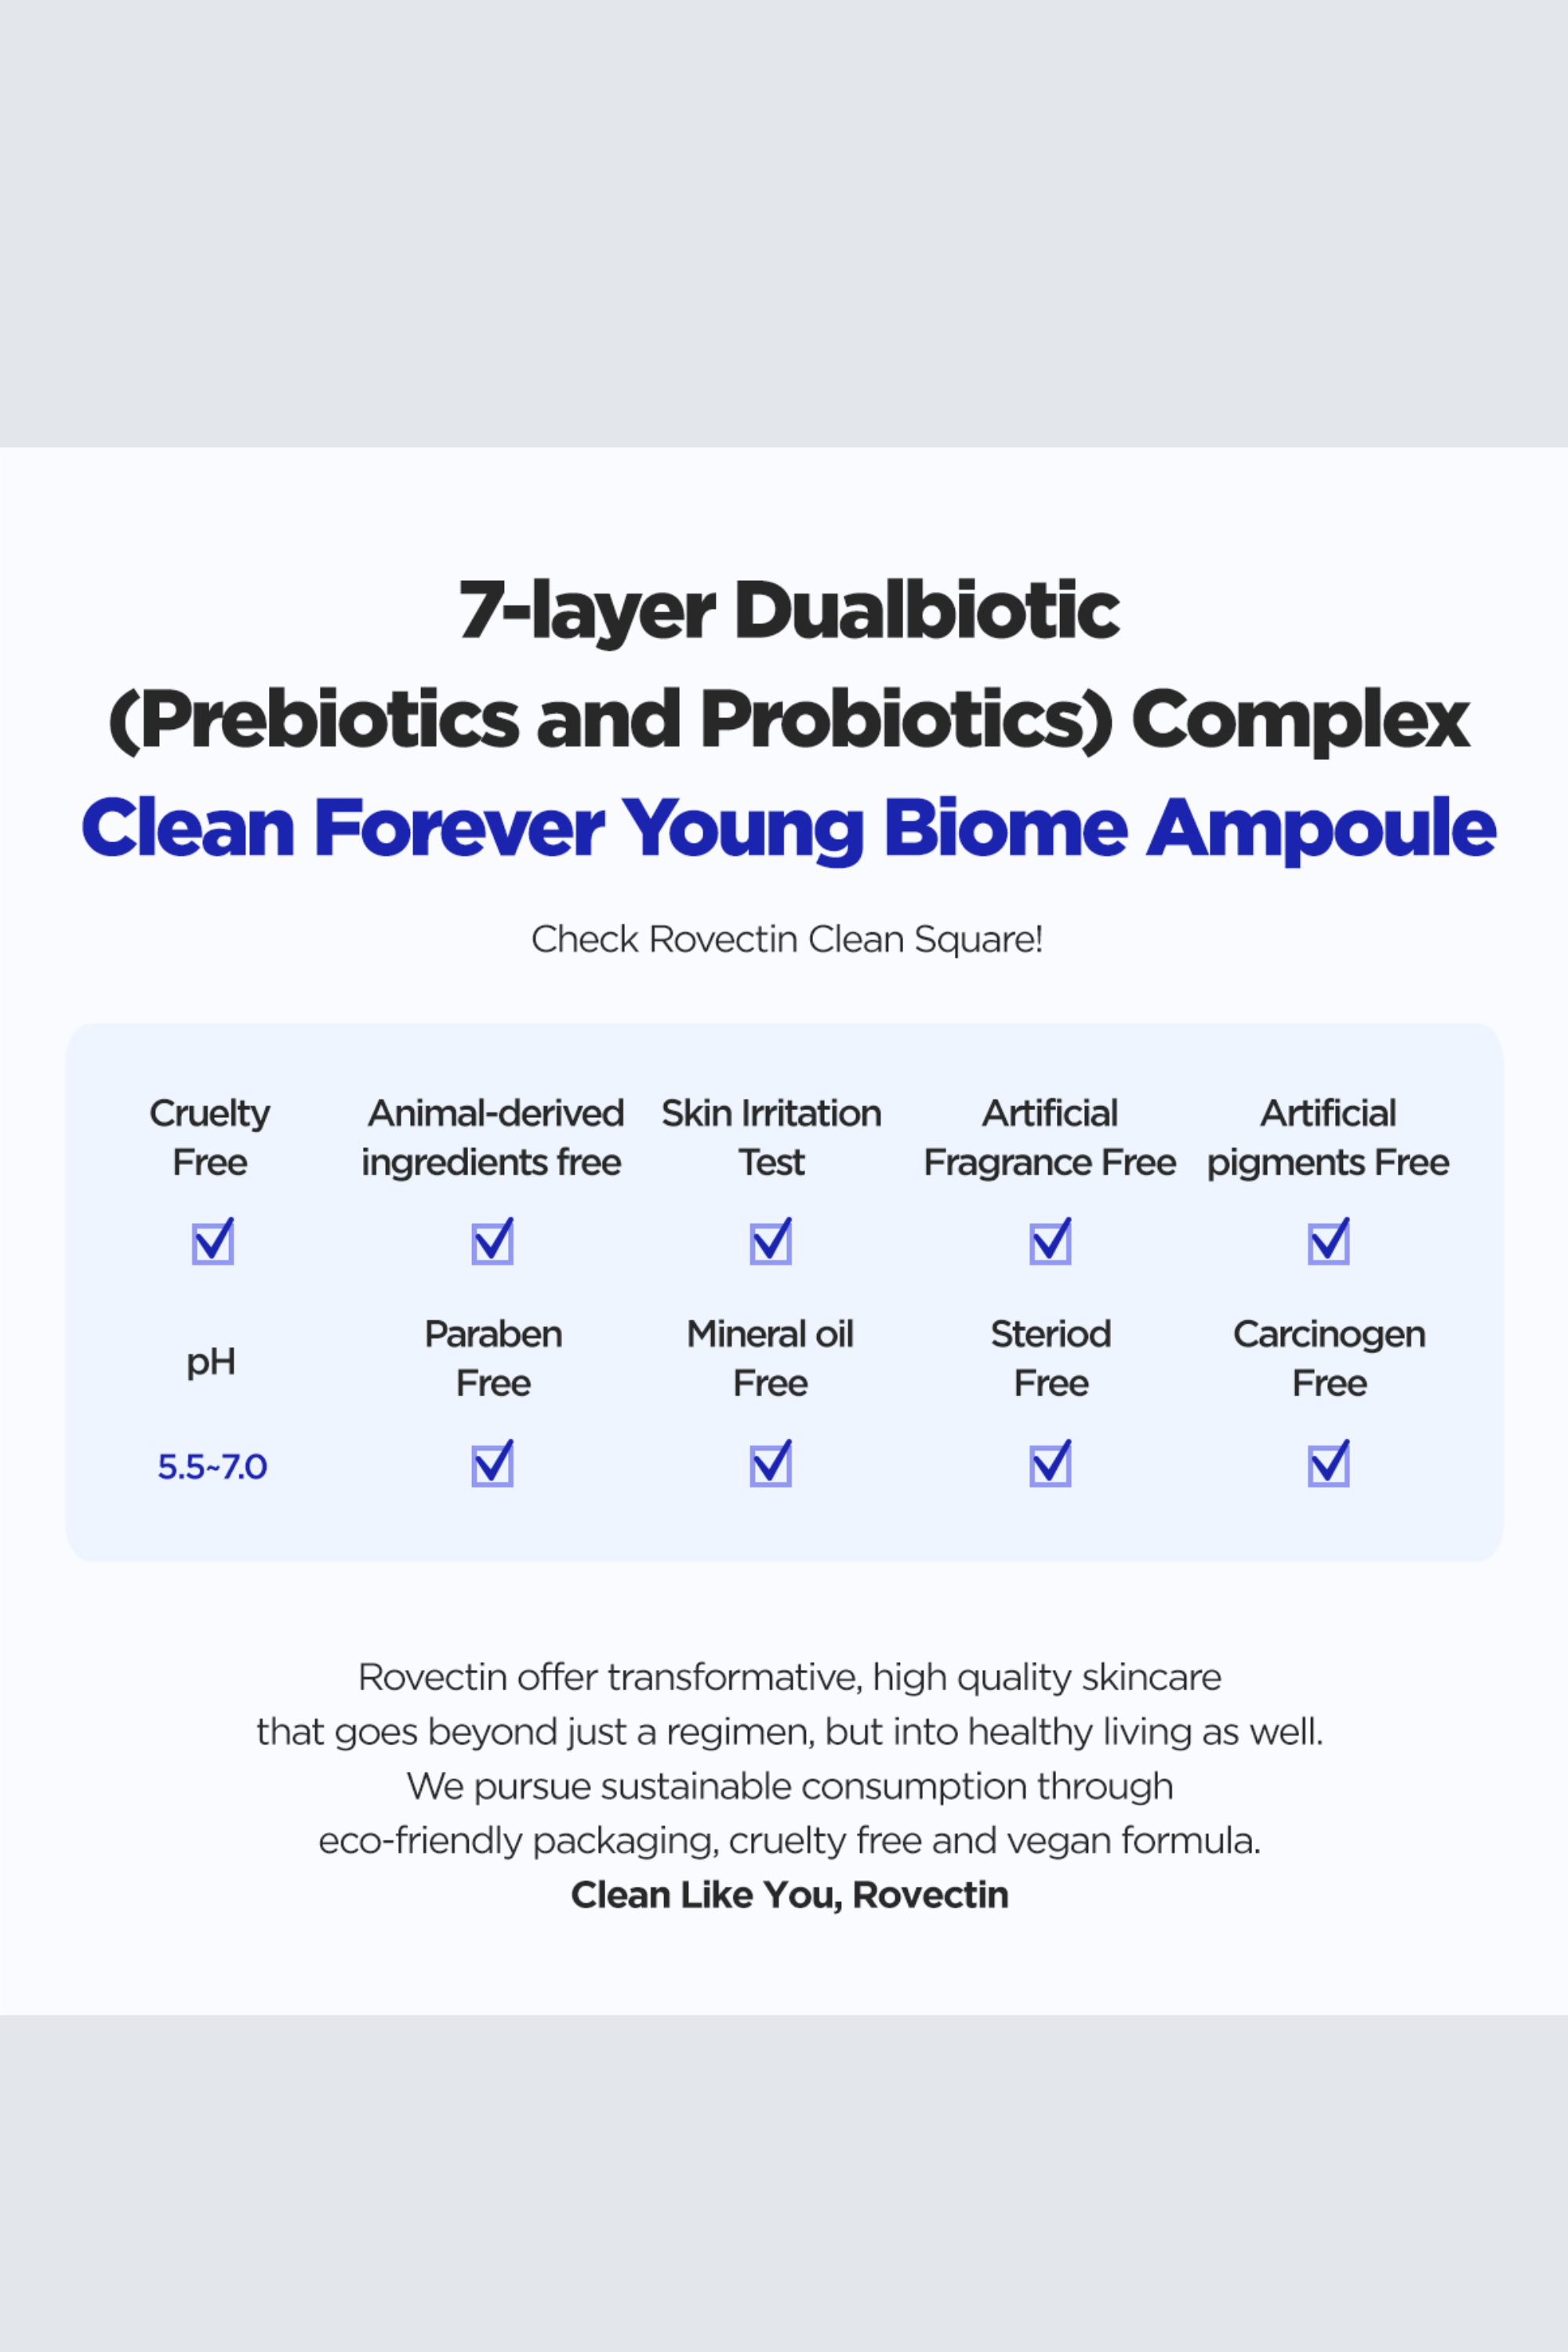 Clean Forever Young Biome Ampoule - Rovectin Skin Essentials